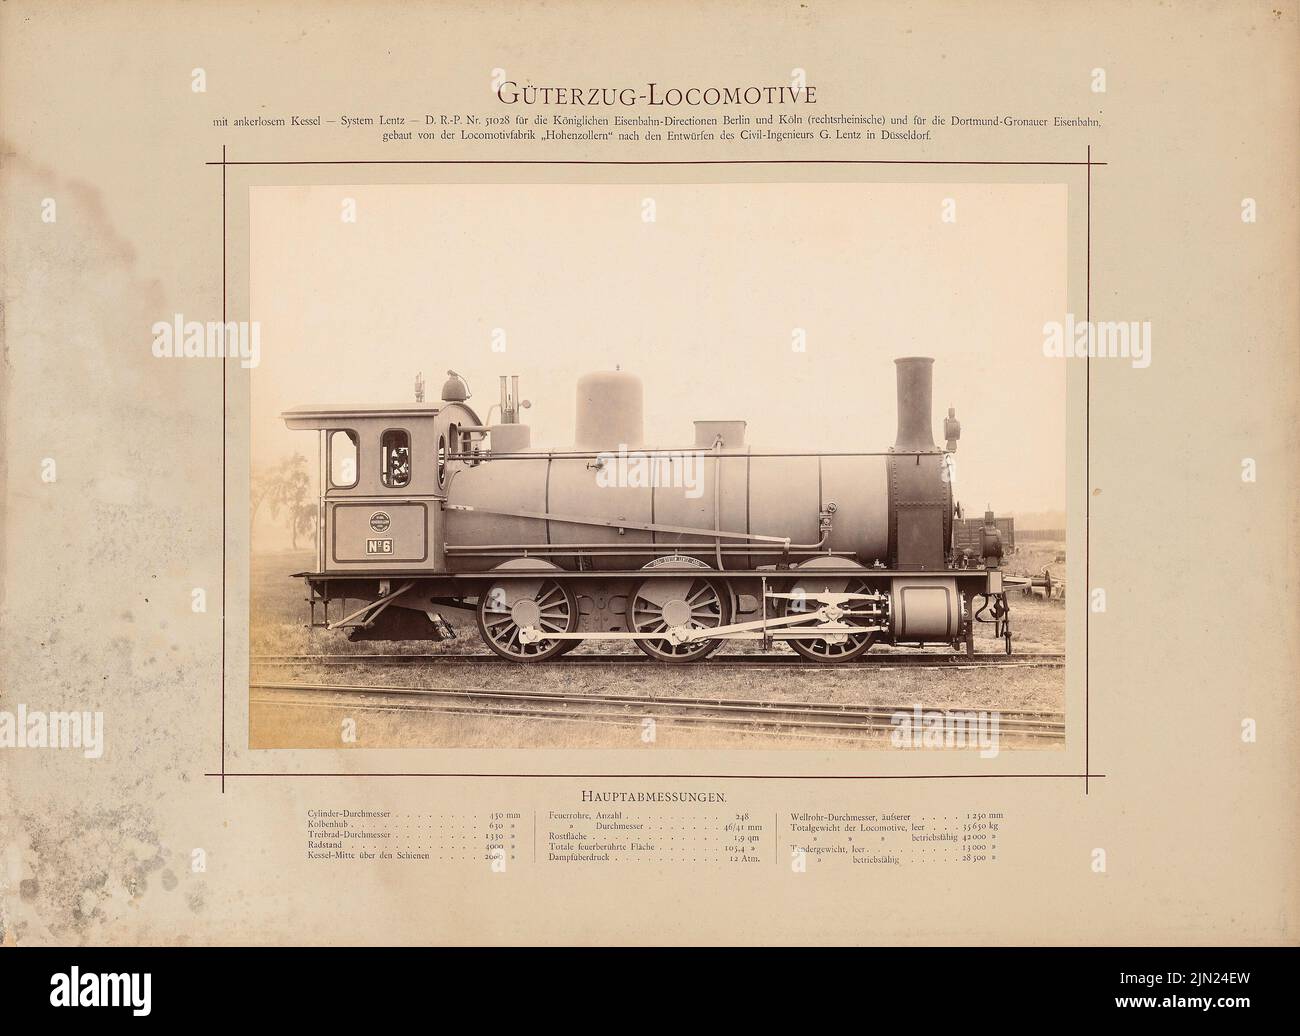 Lentz G., freight locomotive for the Royal Railway Directions in Berlin and Cologne and for the Dortmund-Gronau railway: View: With anchorless boiler, D.R.-P no. 51028, built by the Hohenzollern locomotive factory. Photo on cardboard, 47.8 x 65.7 cm (including scan edge). Stock Photo